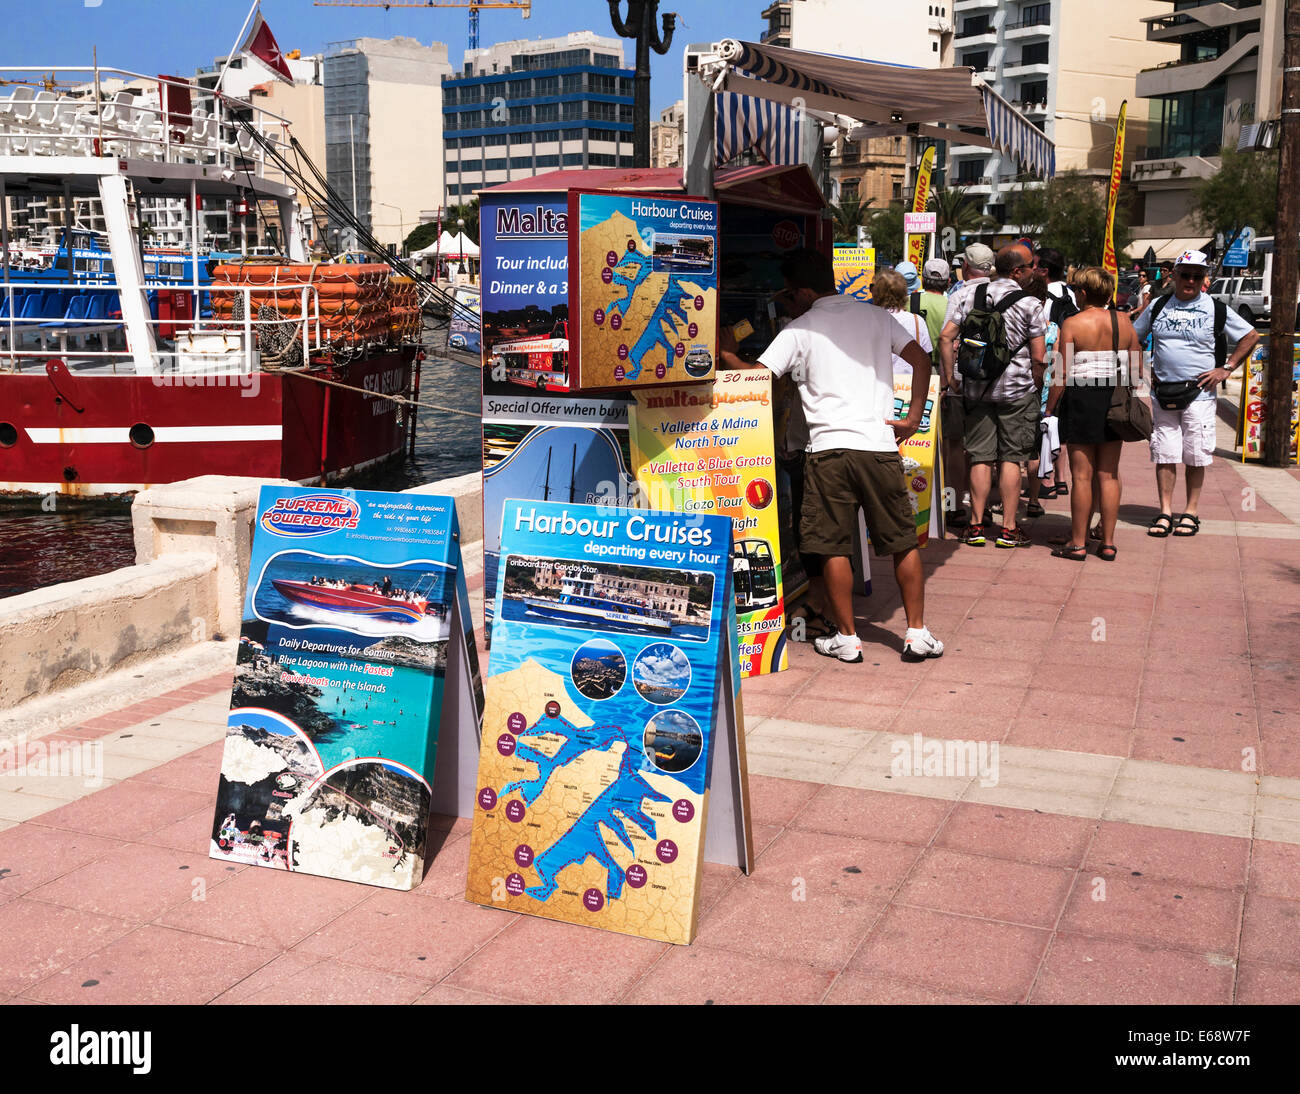 A booth on the promenade in Sliema selling tourist excursions by boat and bus, Malta. Stock Photo